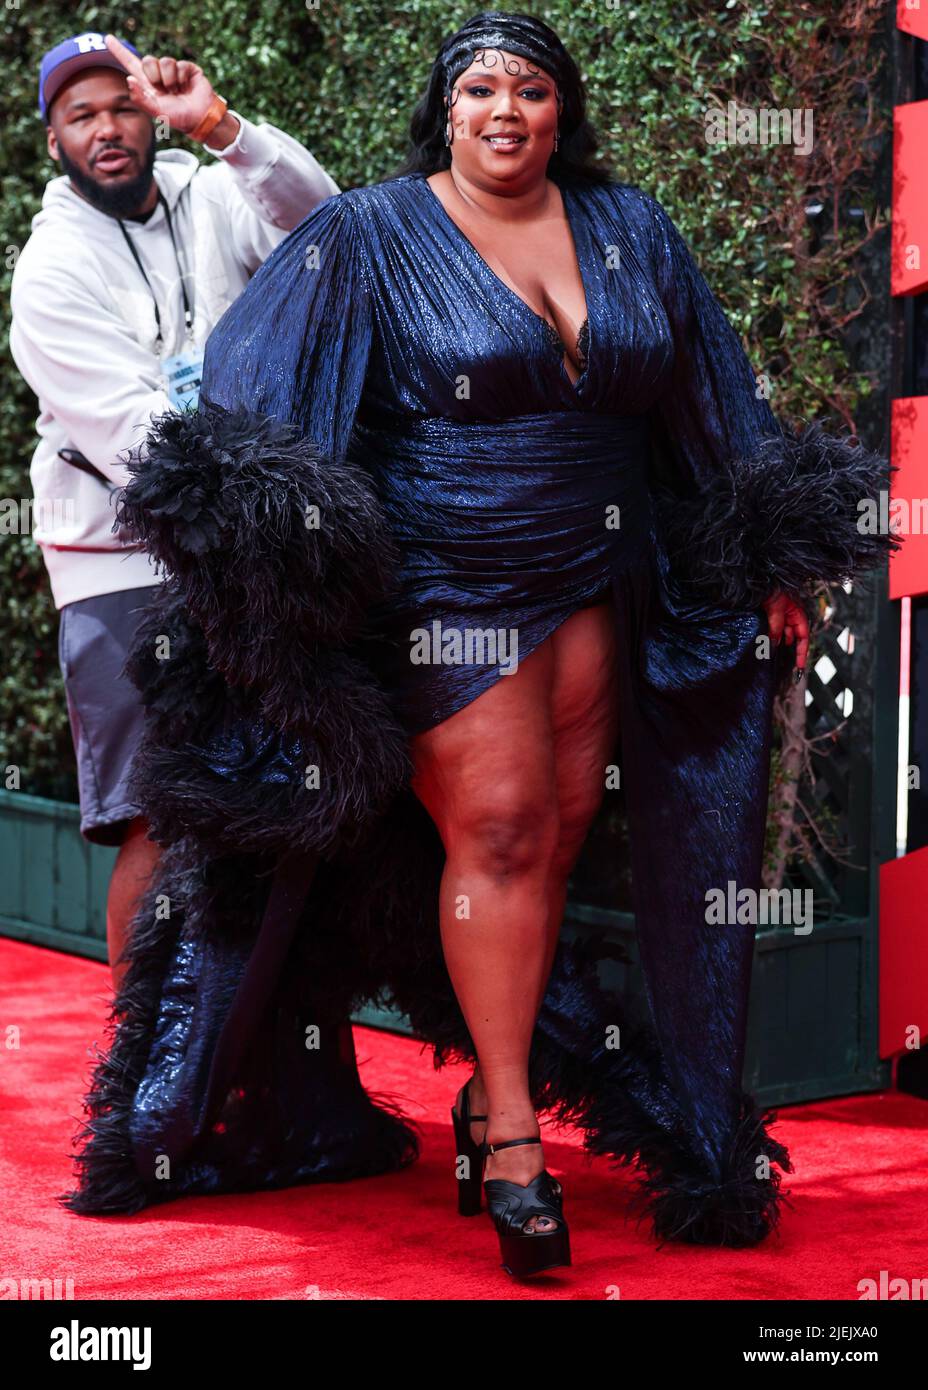 LOS ANGELES, CALIFORNIA, USA - JUNE 26: American singer Lizzo wearing a custom Gucci feathered gown arrives at the BET Awards 2022 held at Microsoft Theater at L.A. Live on June 26, 2022 in Los Angeles, California, United States. (Photo by Xavier Collin/Image Press Agency) Credit: Image Press Agency/Alamy Live News Stock Photo